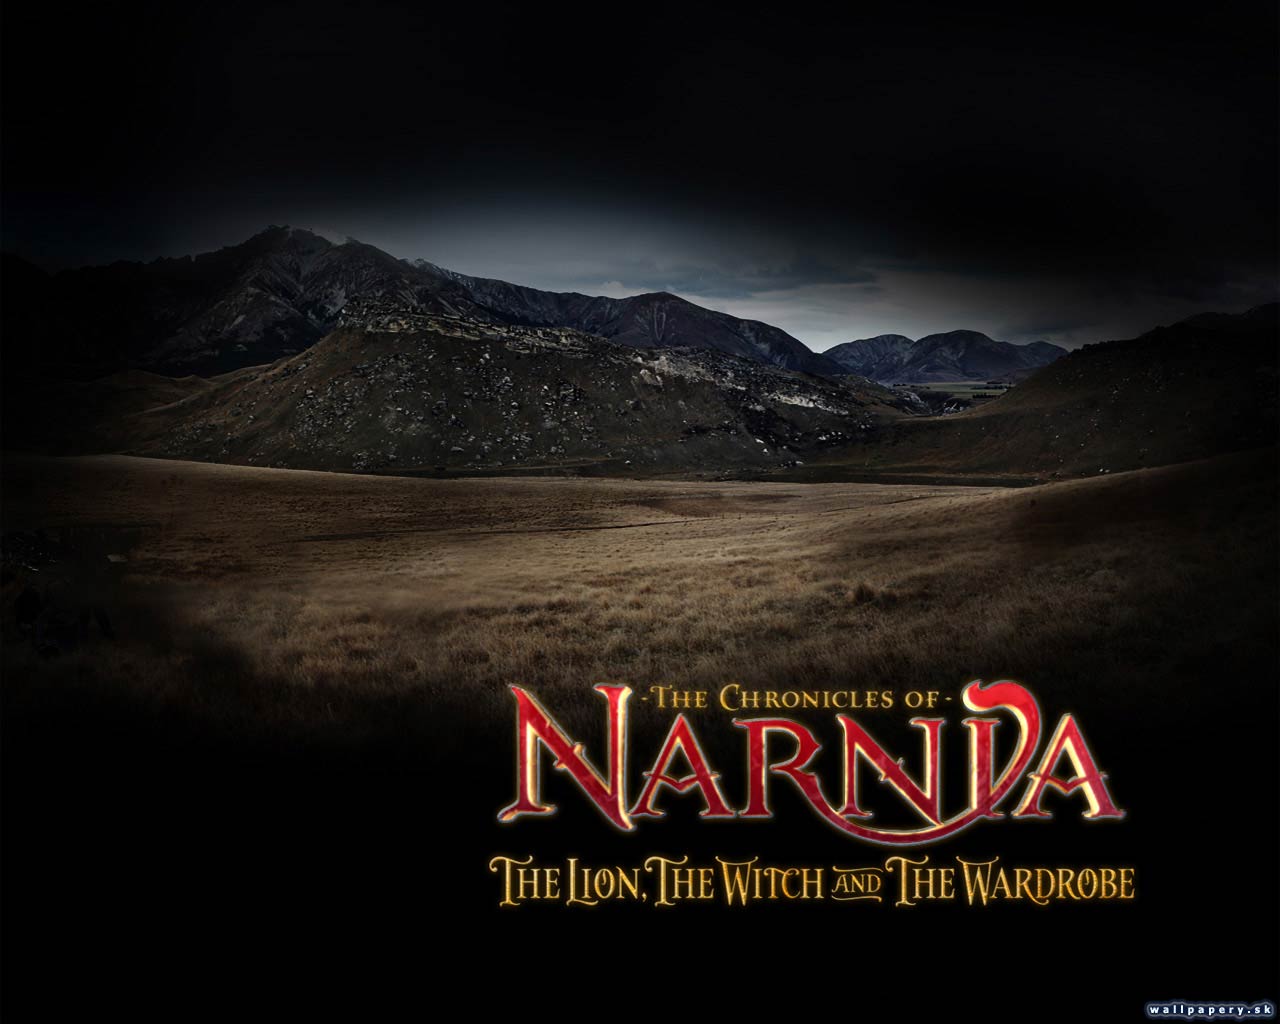 The Chronicles of Narnia: The Lion, The Witch and the Wardrobe - wallpaper 8